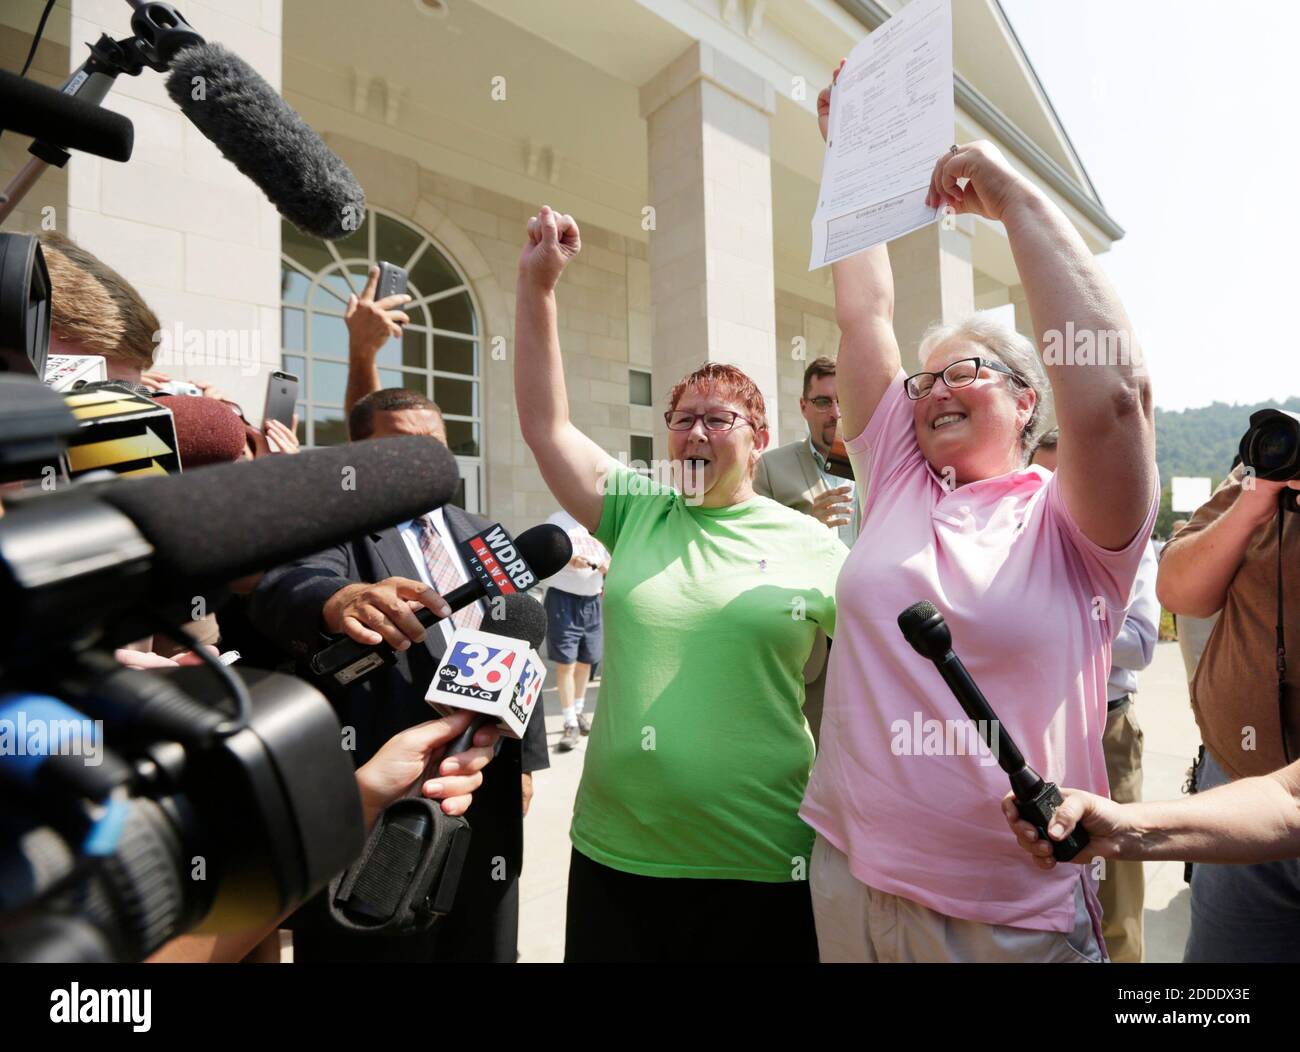 NO FILM, NO VIDEO, NO TV, NO DOCUMENTARY - Plaintiffs Karen Roberts, left, and April Miller celebrate after receiving their marriage license from Deputy Clerk Brian Mason at the Rowan County clerk's office in the County Courthouse in Morehead, KY, USA, on Friday, September 4, 2015. Photo by Pablo Alcala/Lexington Herald-Leader/TNS/ABACAPRESS.COM Stock Photo